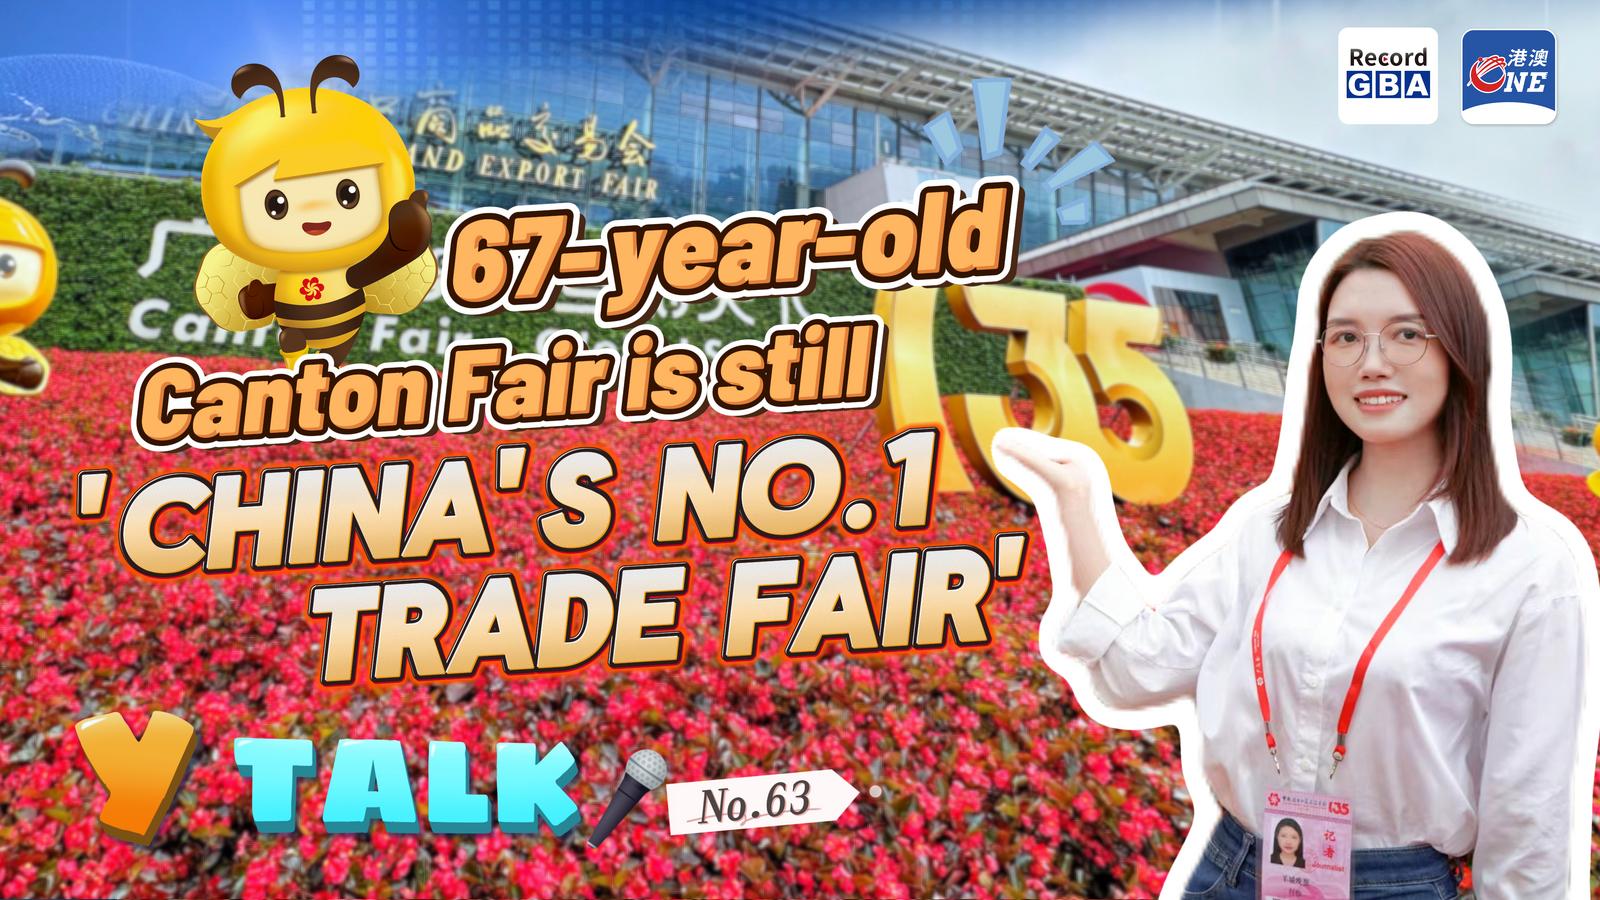 Y Talk 63｜67-year-old Canton Fair is still "China's Number One Trade Fair"